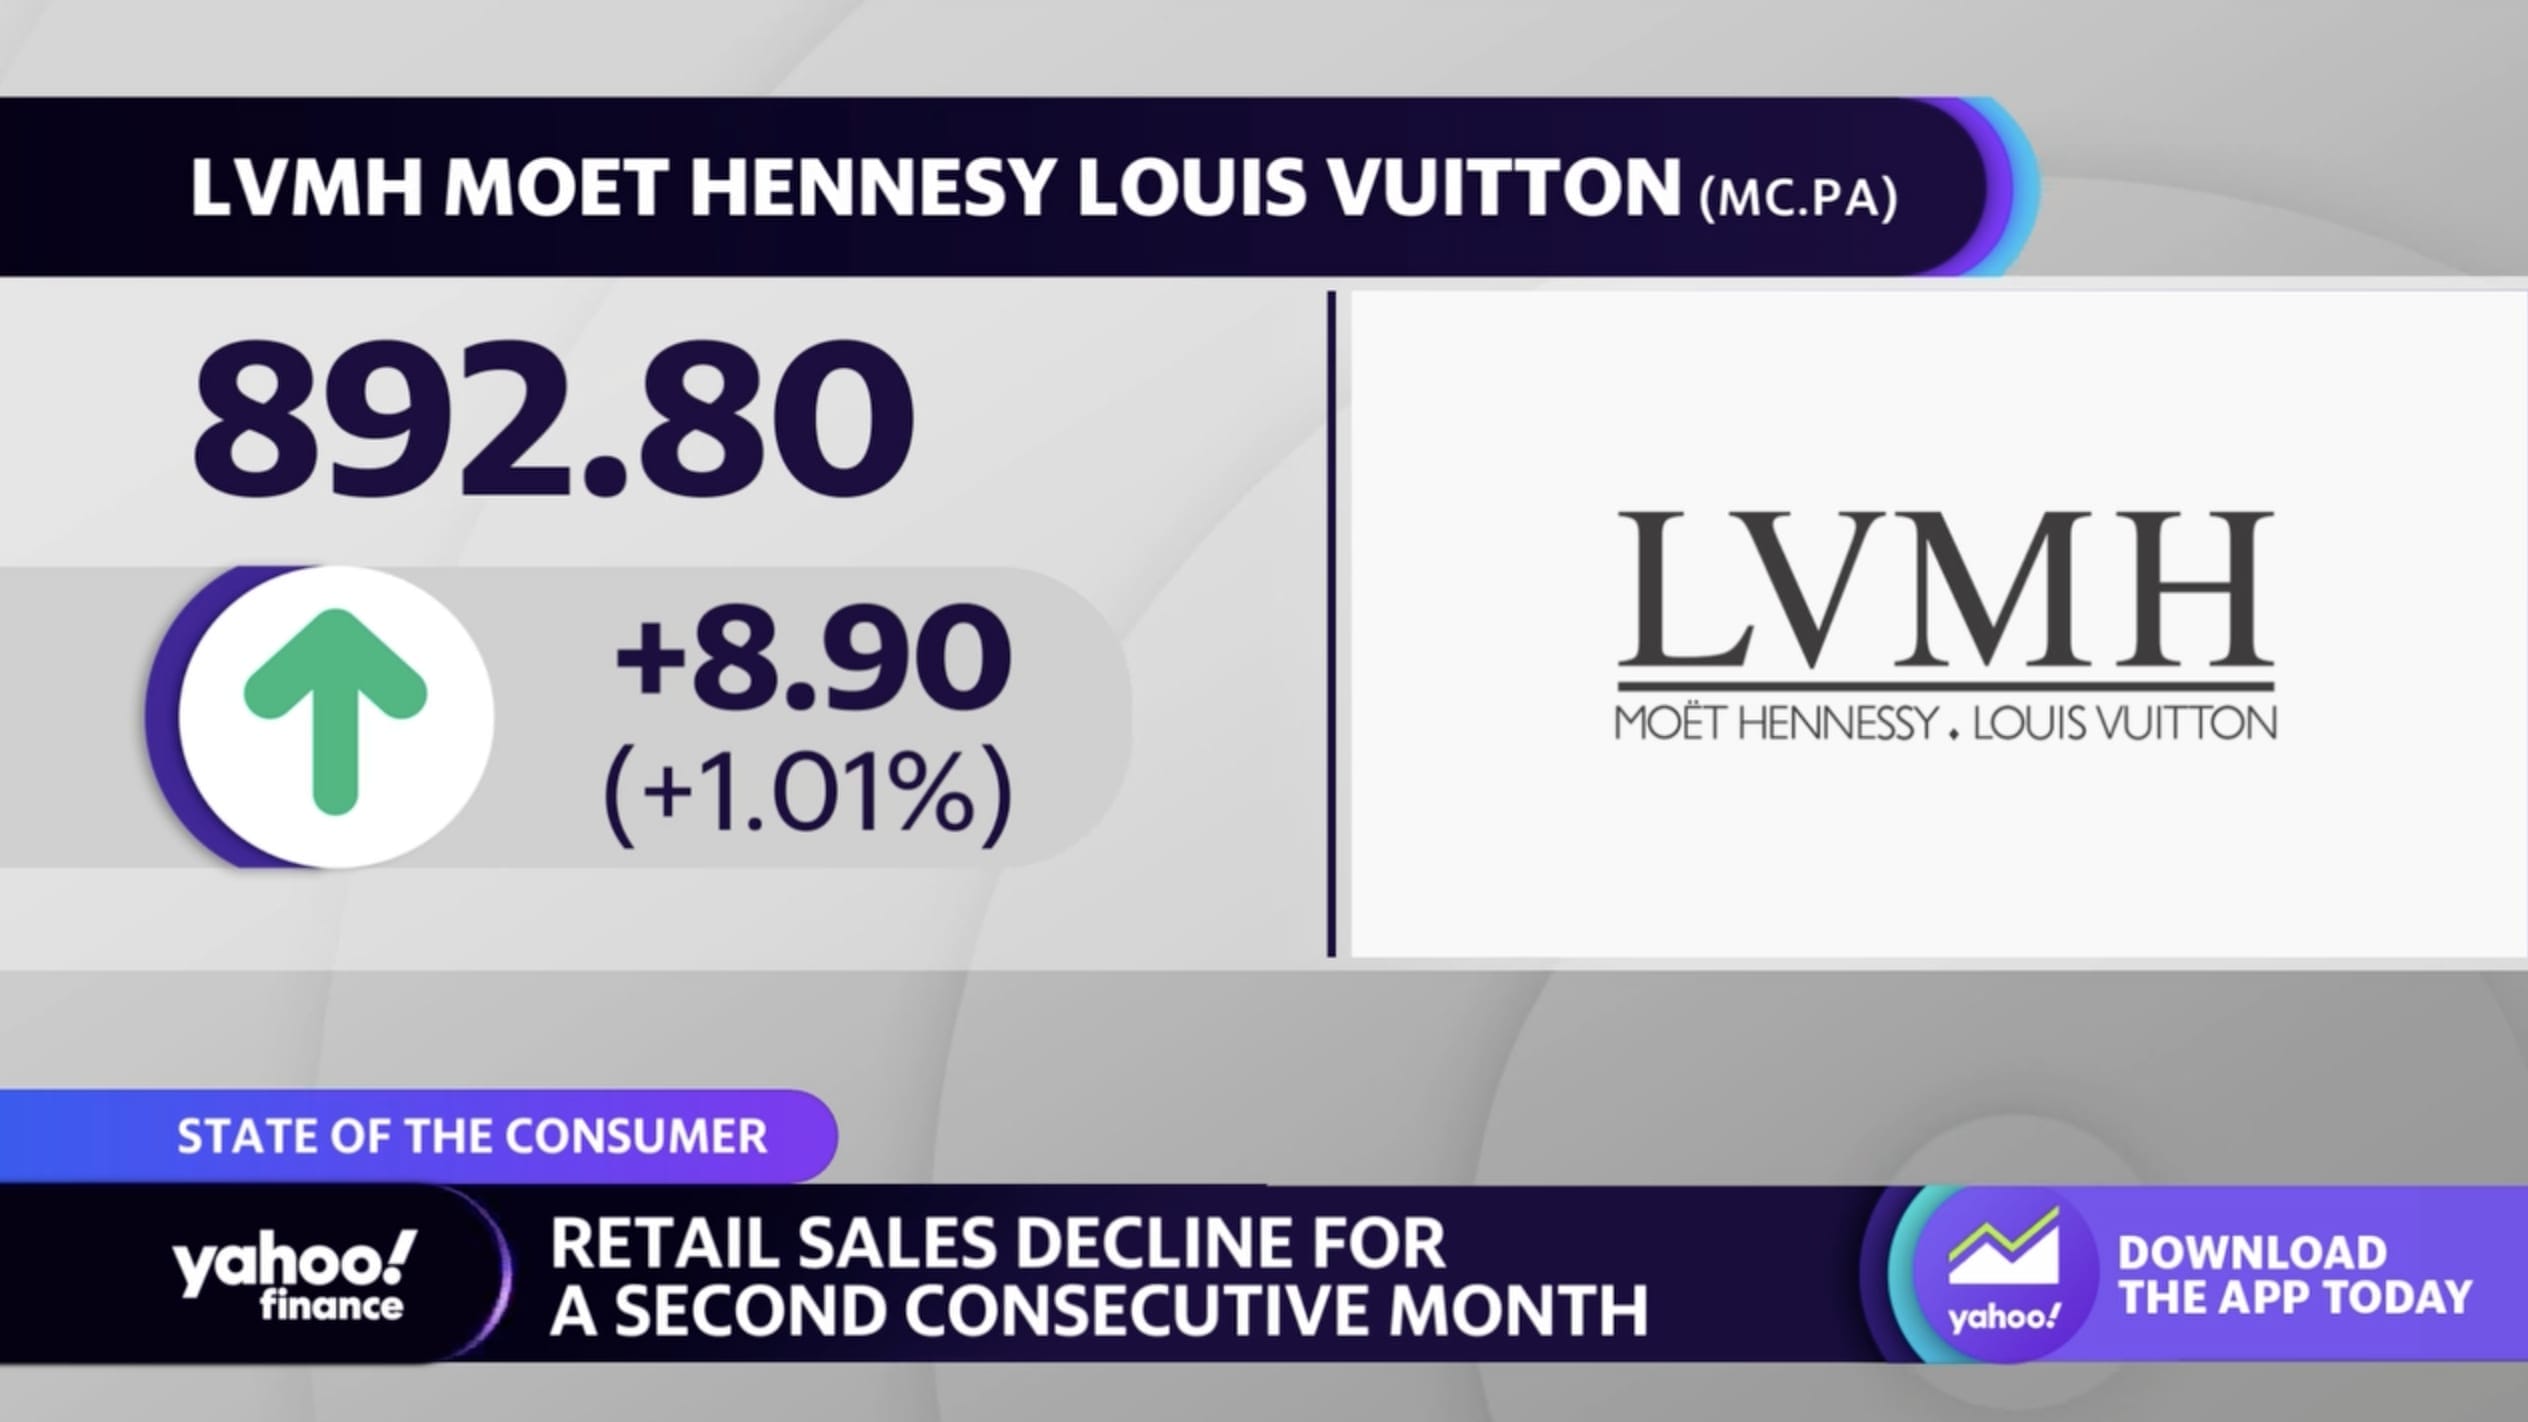 LVMH, Other Luxury Brands Raise Prices, Betting Wealthy Customers